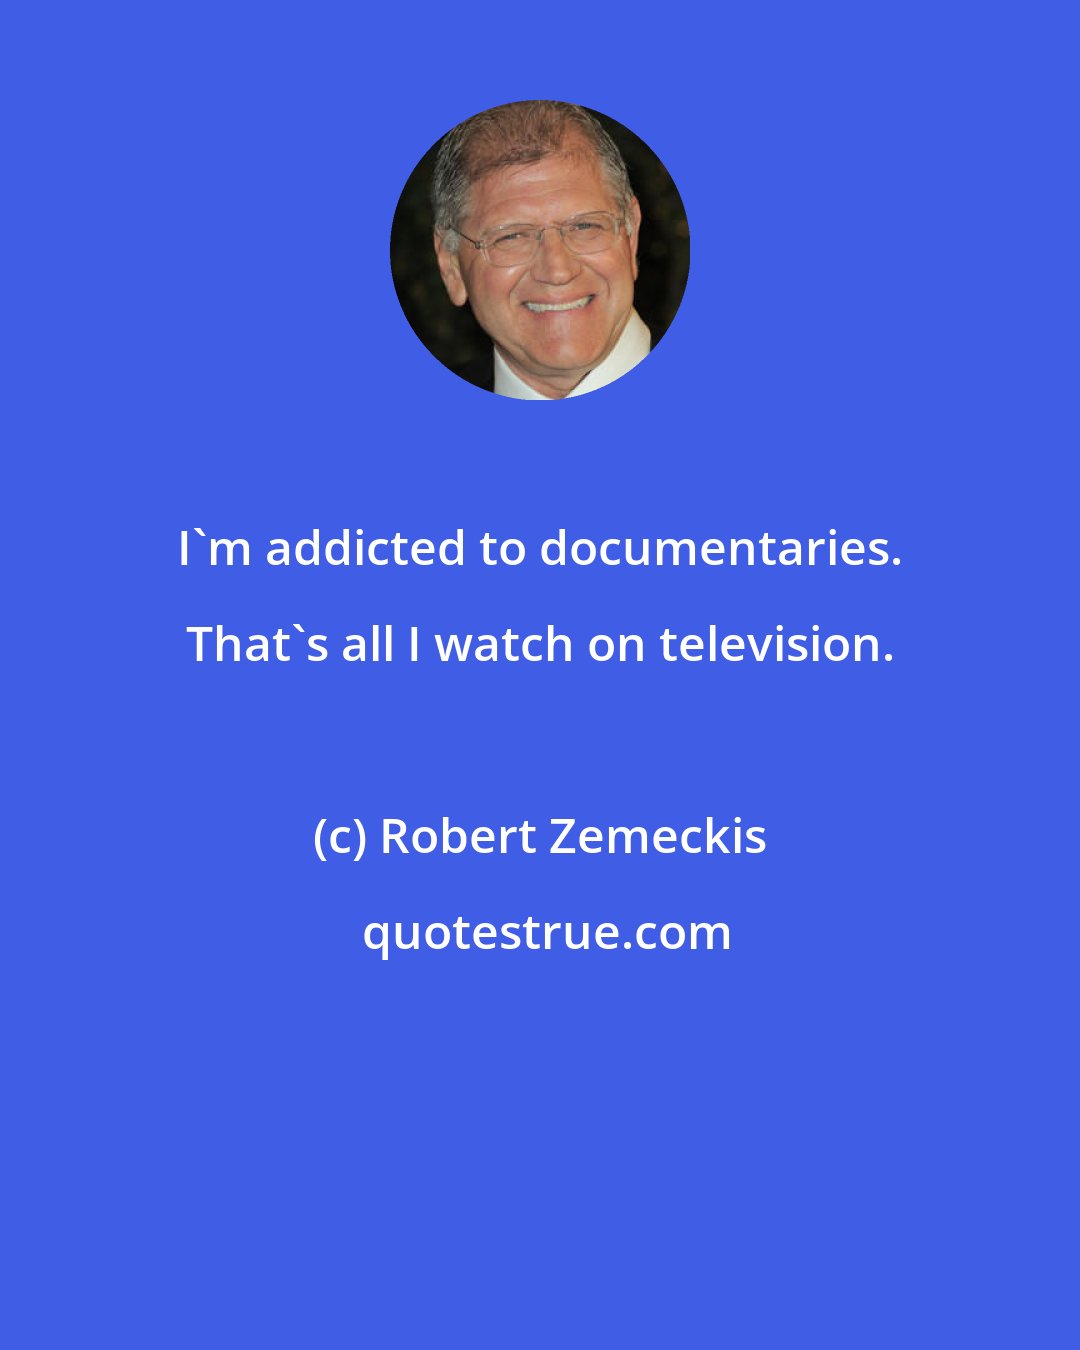 Robert Zemeckis: I'm addicted to documentaries. That's all I watch on television.